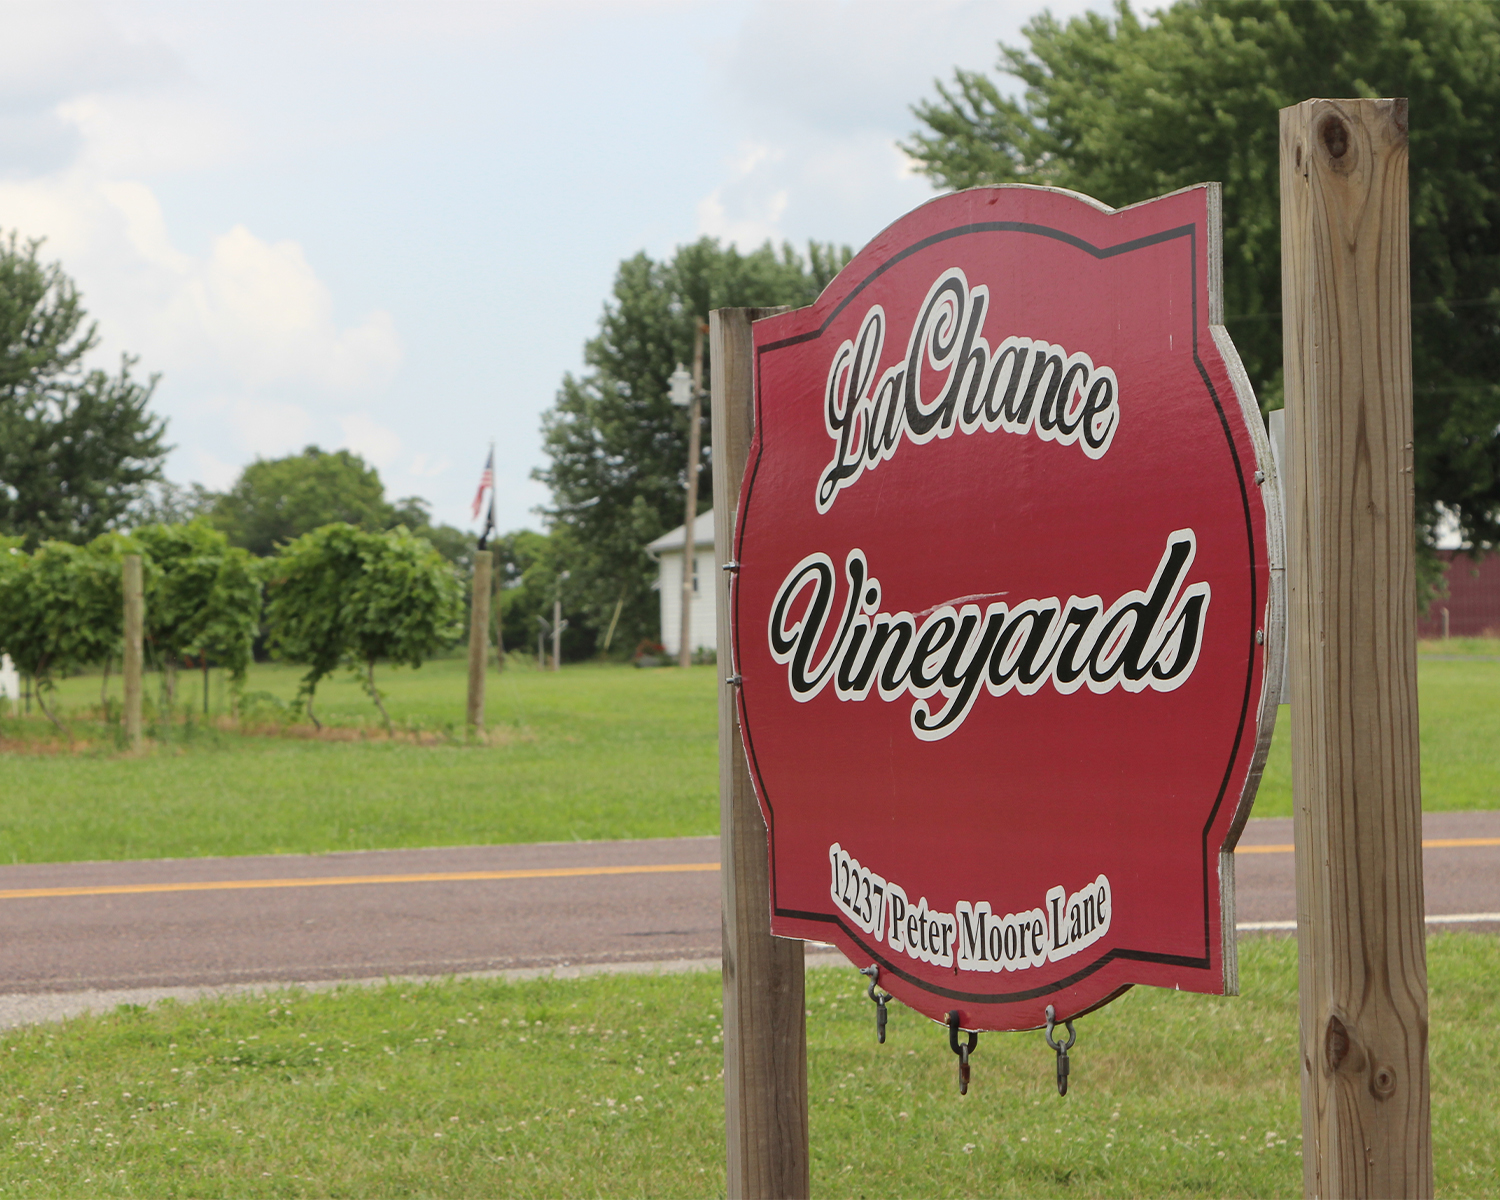 LaChance Vineyards: A tradition of happiness